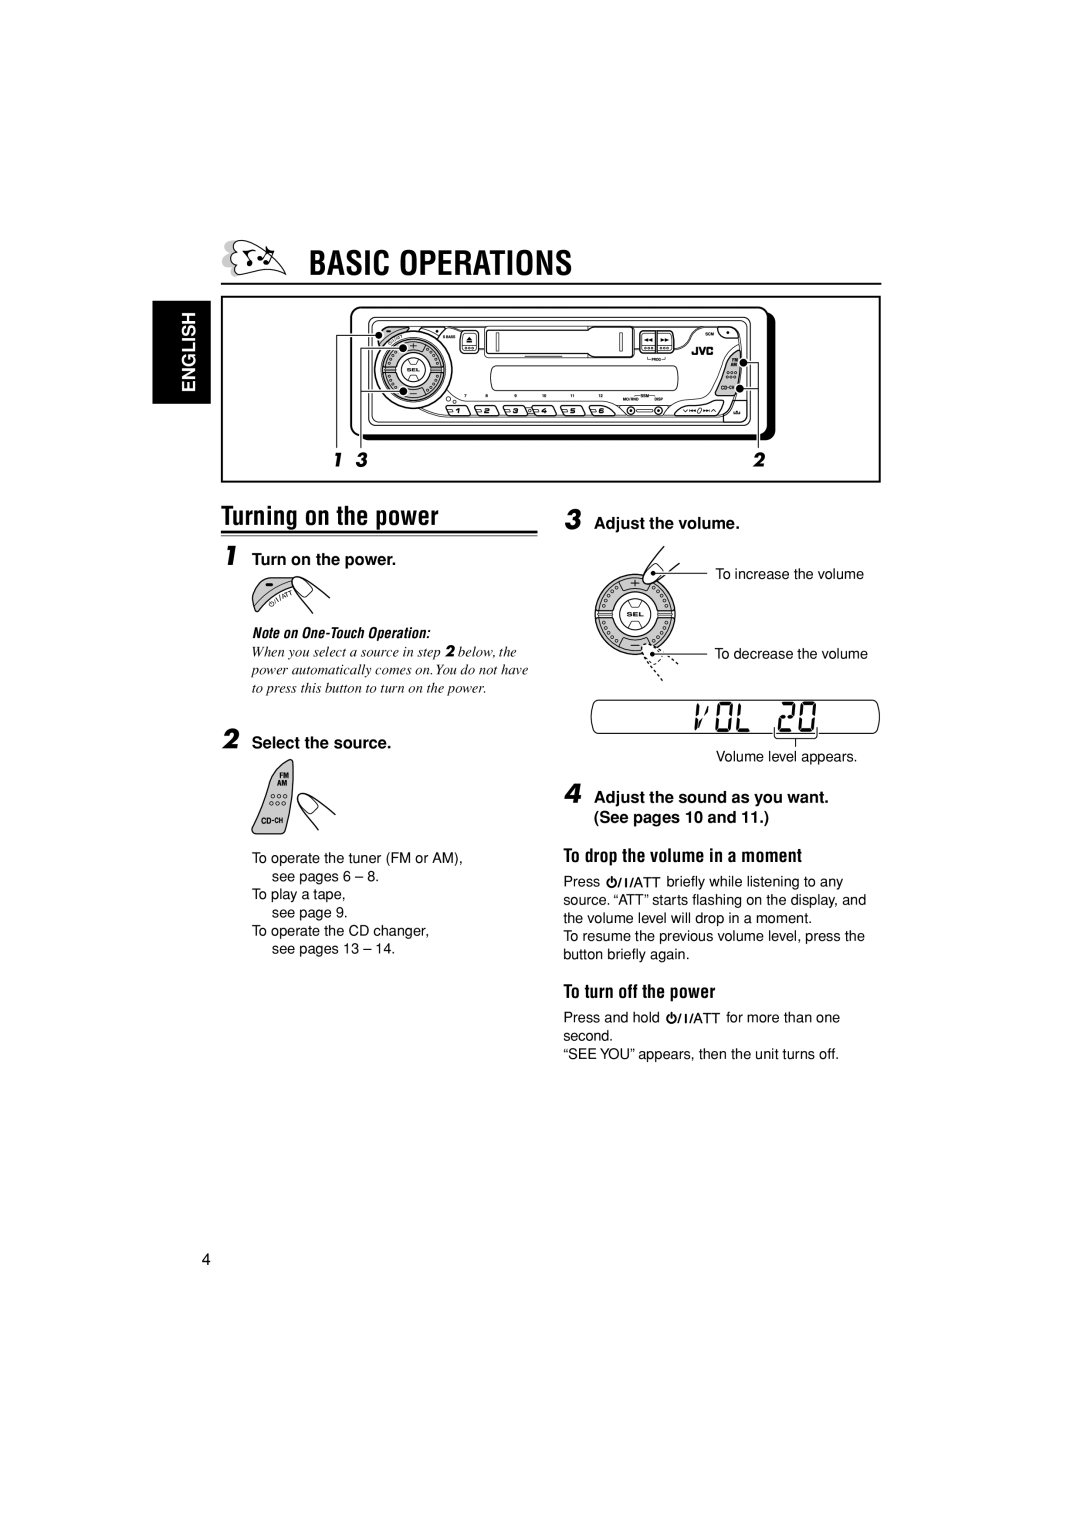 JVC KS-FX385 manual Basic Operations, Turning on the power, English, To drop the volume in a moment, To turn off the power 